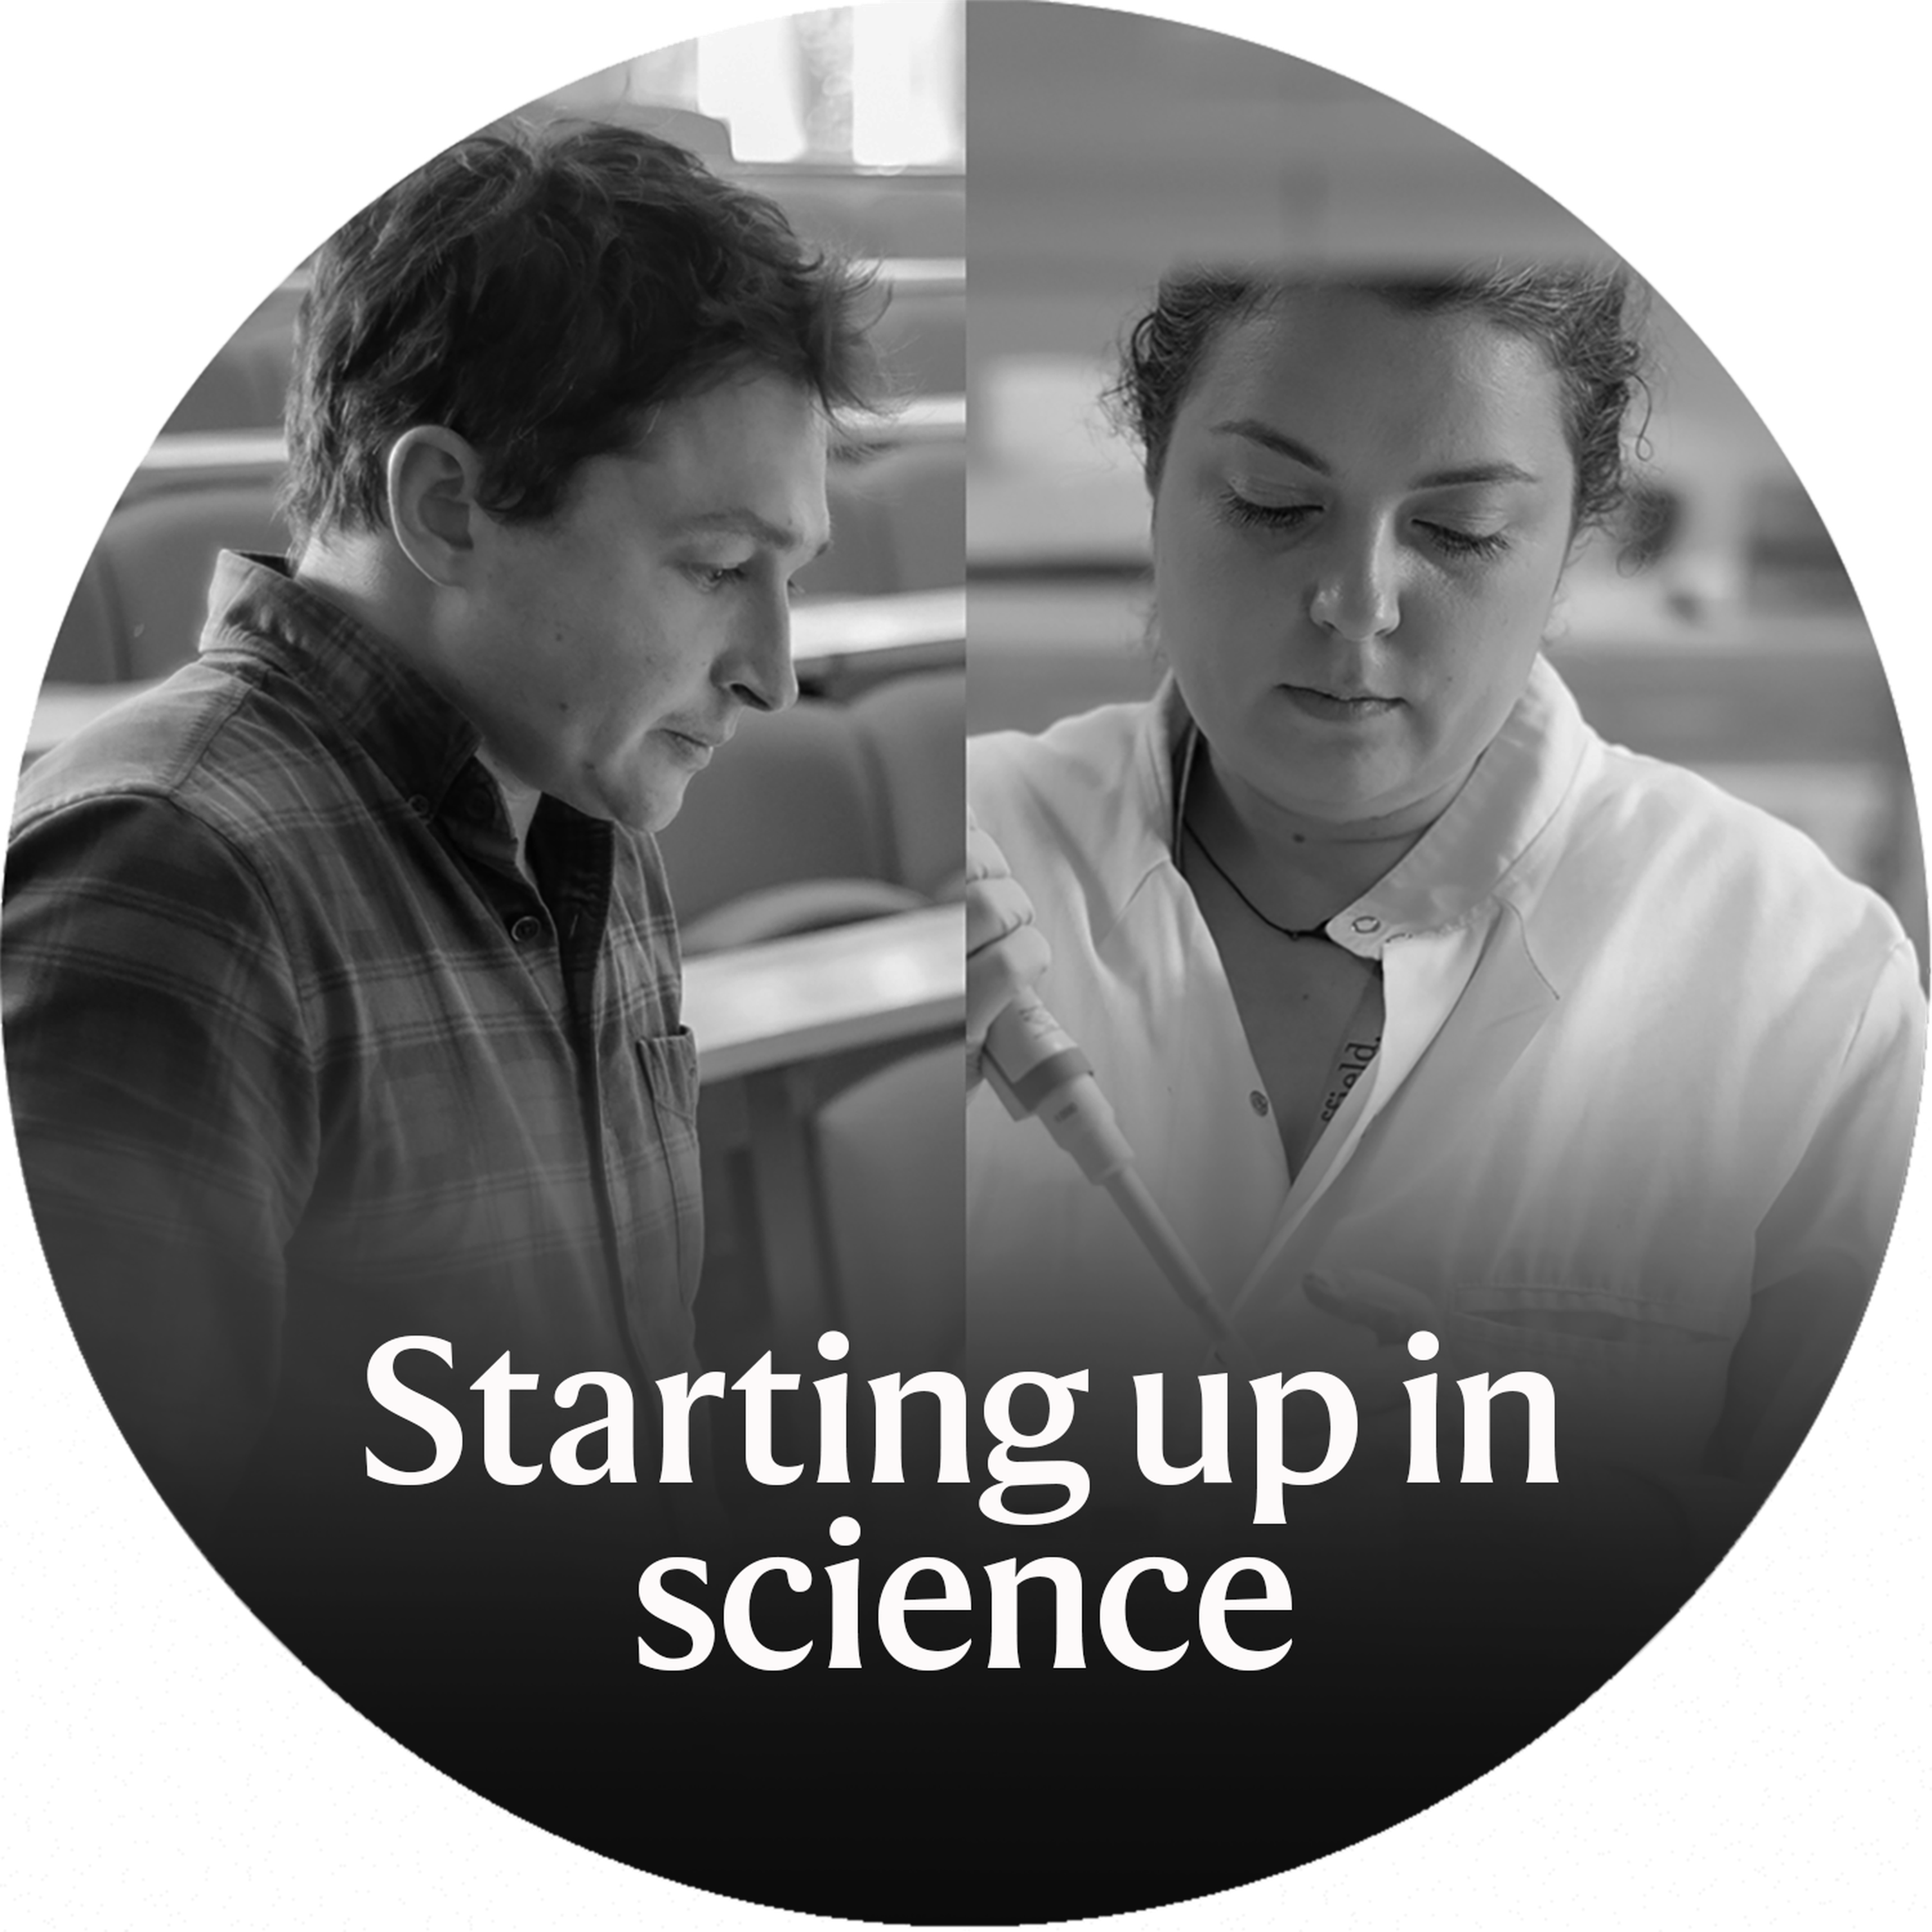 Starting up in science: Episode 1